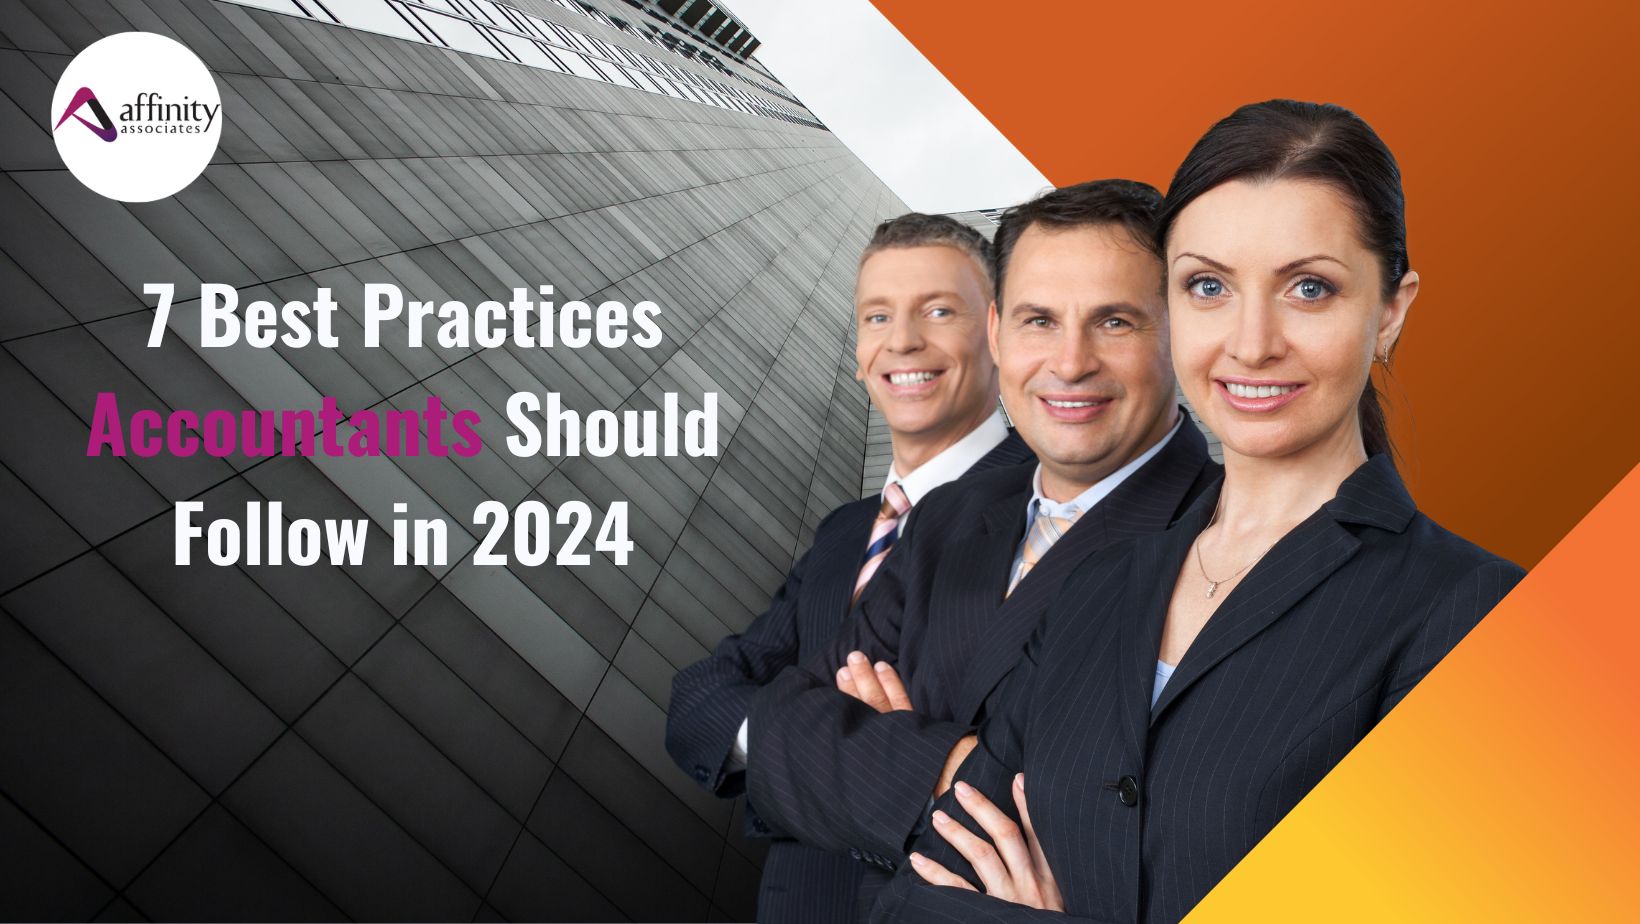 7 Best Practices Accountants Should Follow in 2024